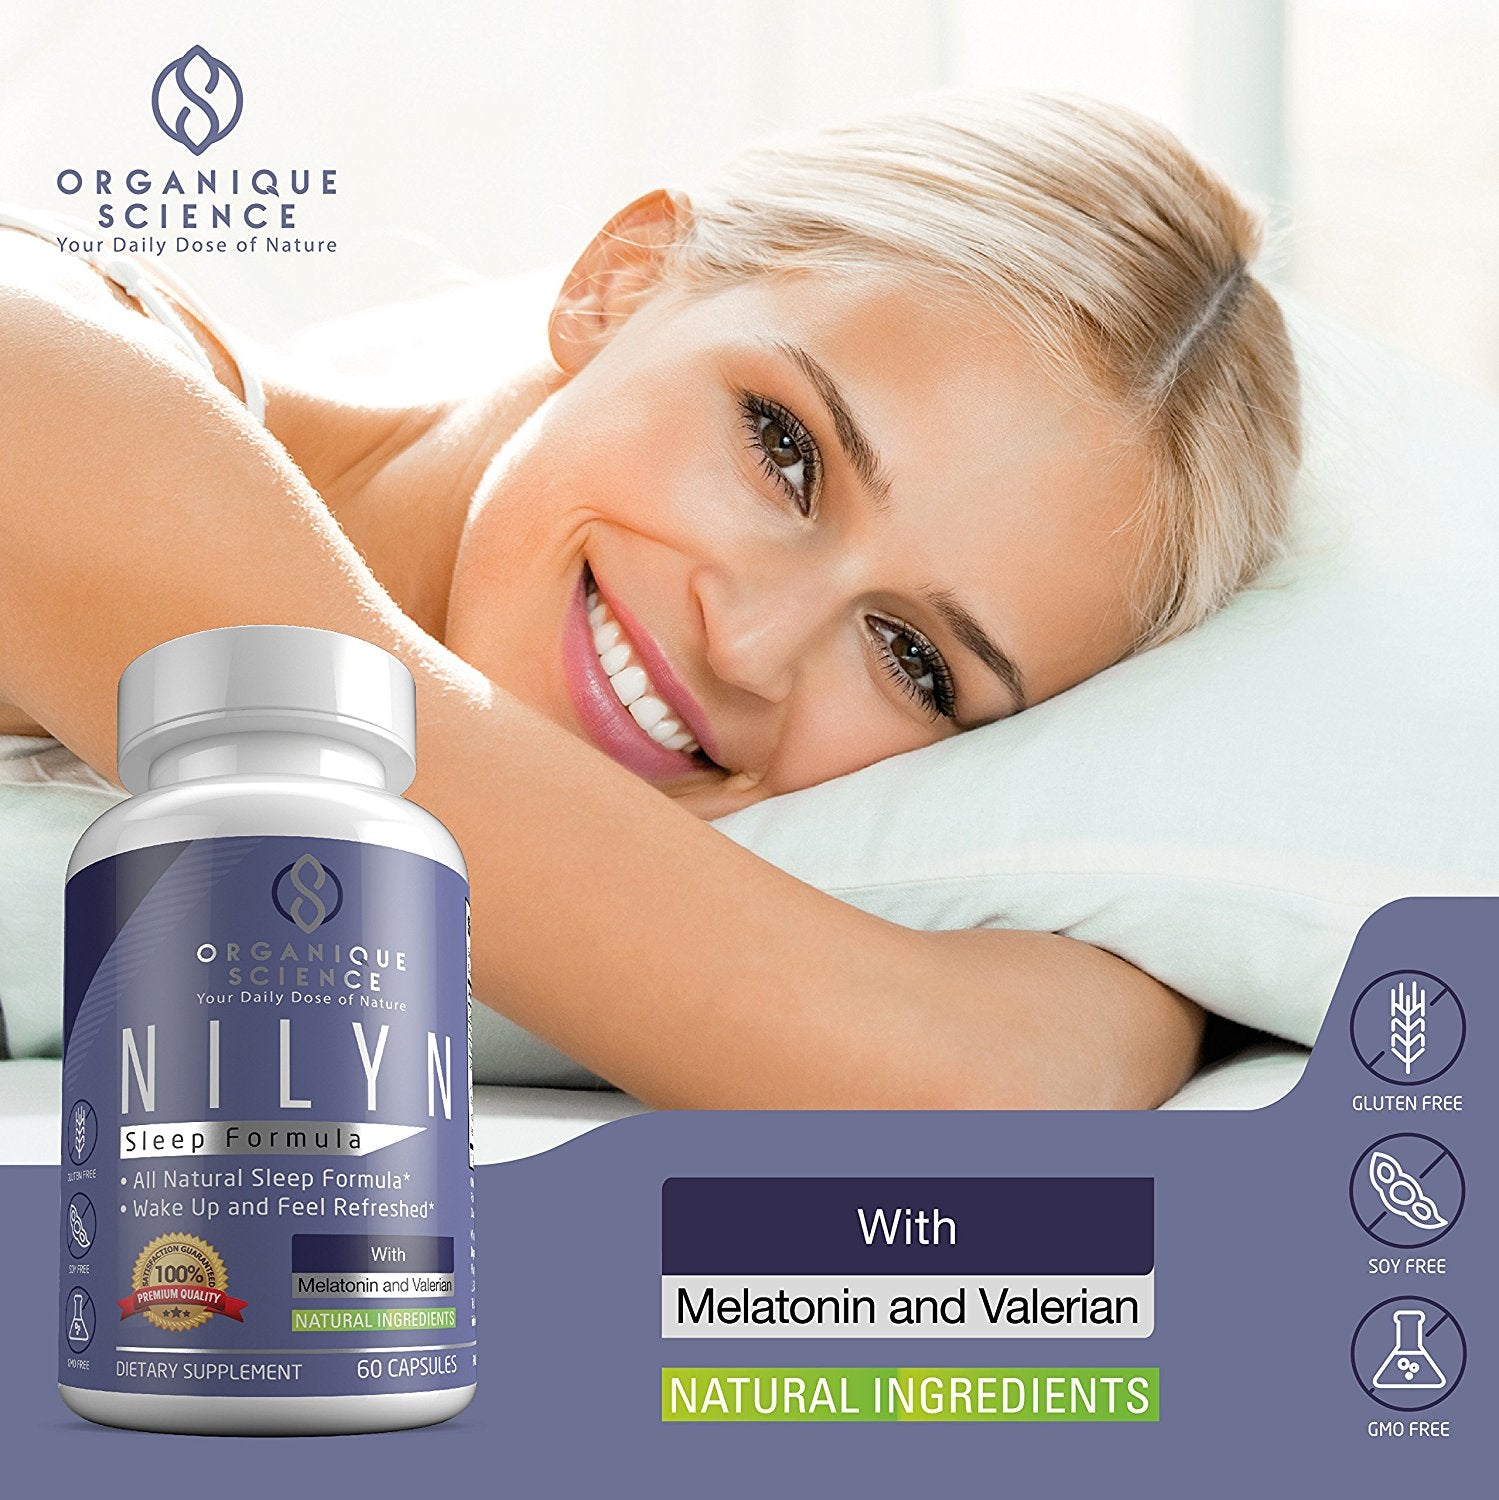 How to Treat Insomnia with Organic Supplements